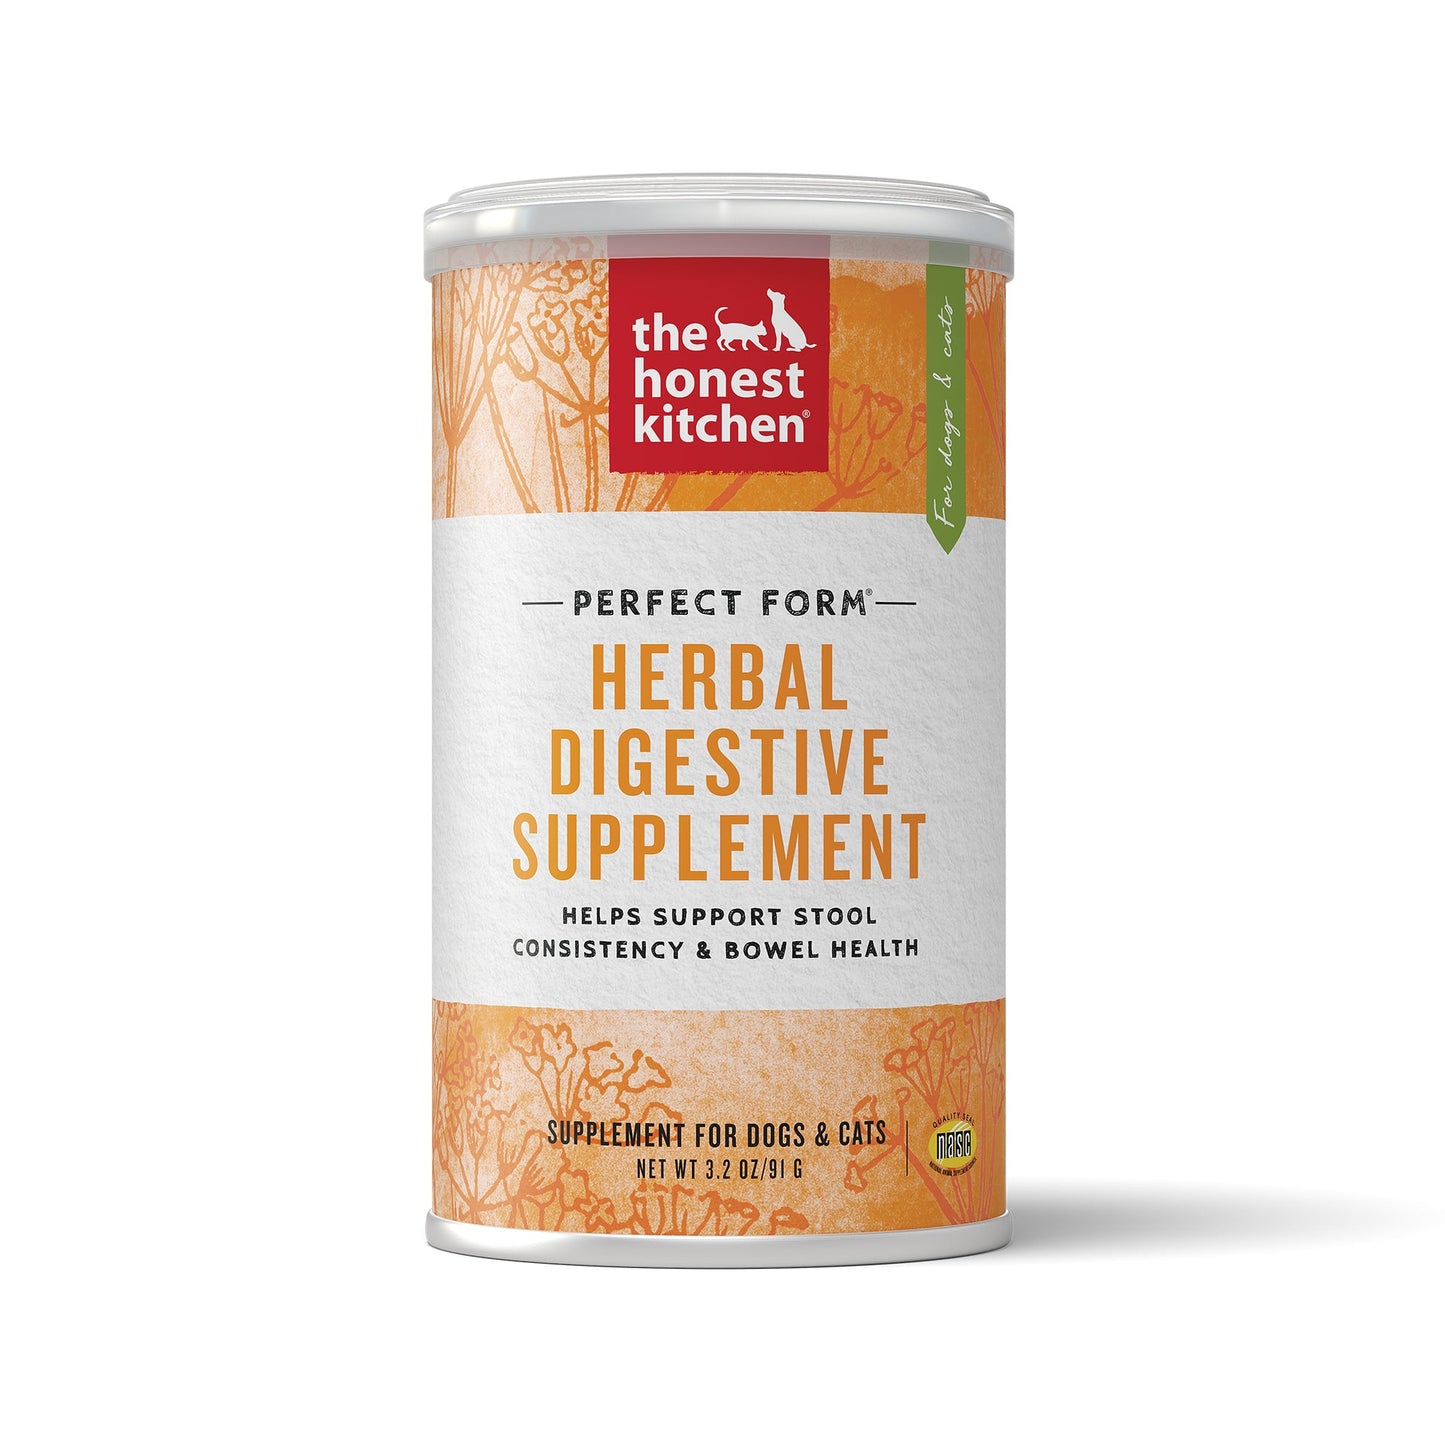 Perfect Form Herbal Digestive Supplement